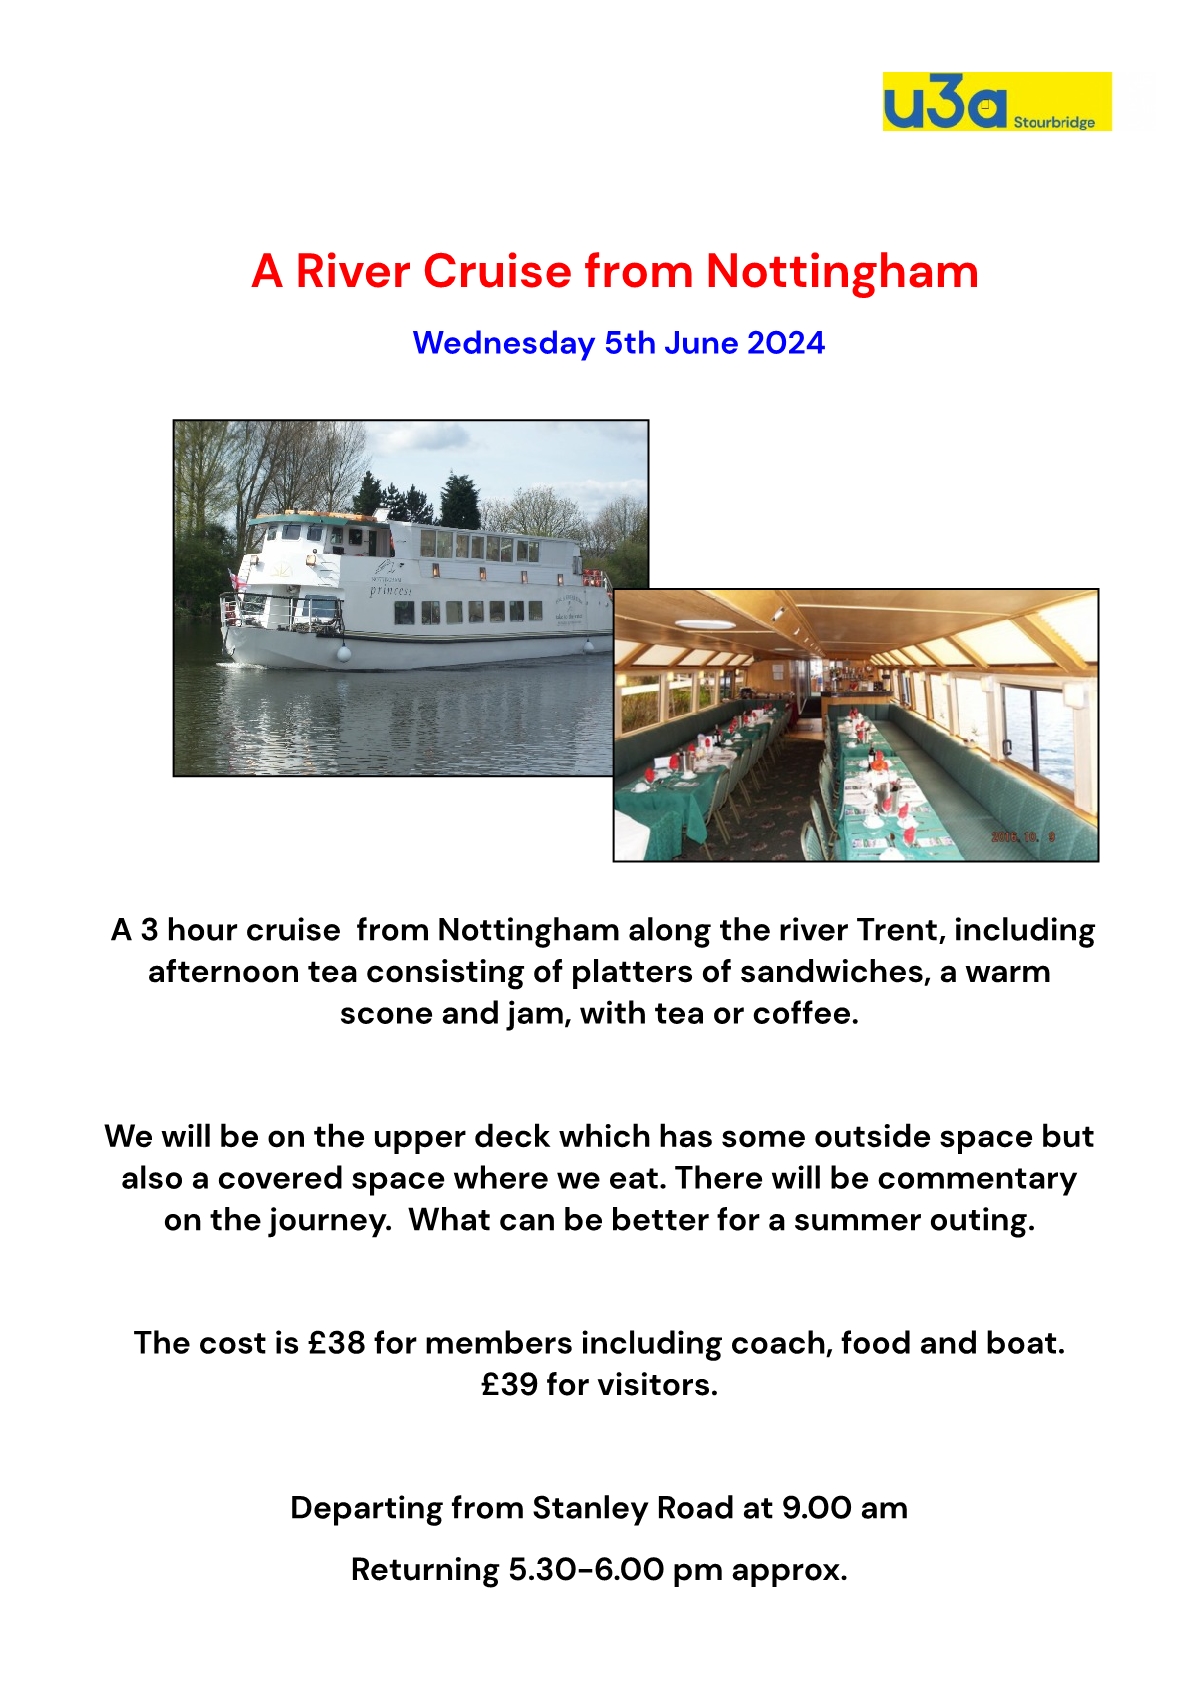 A river cruise from Nottingham